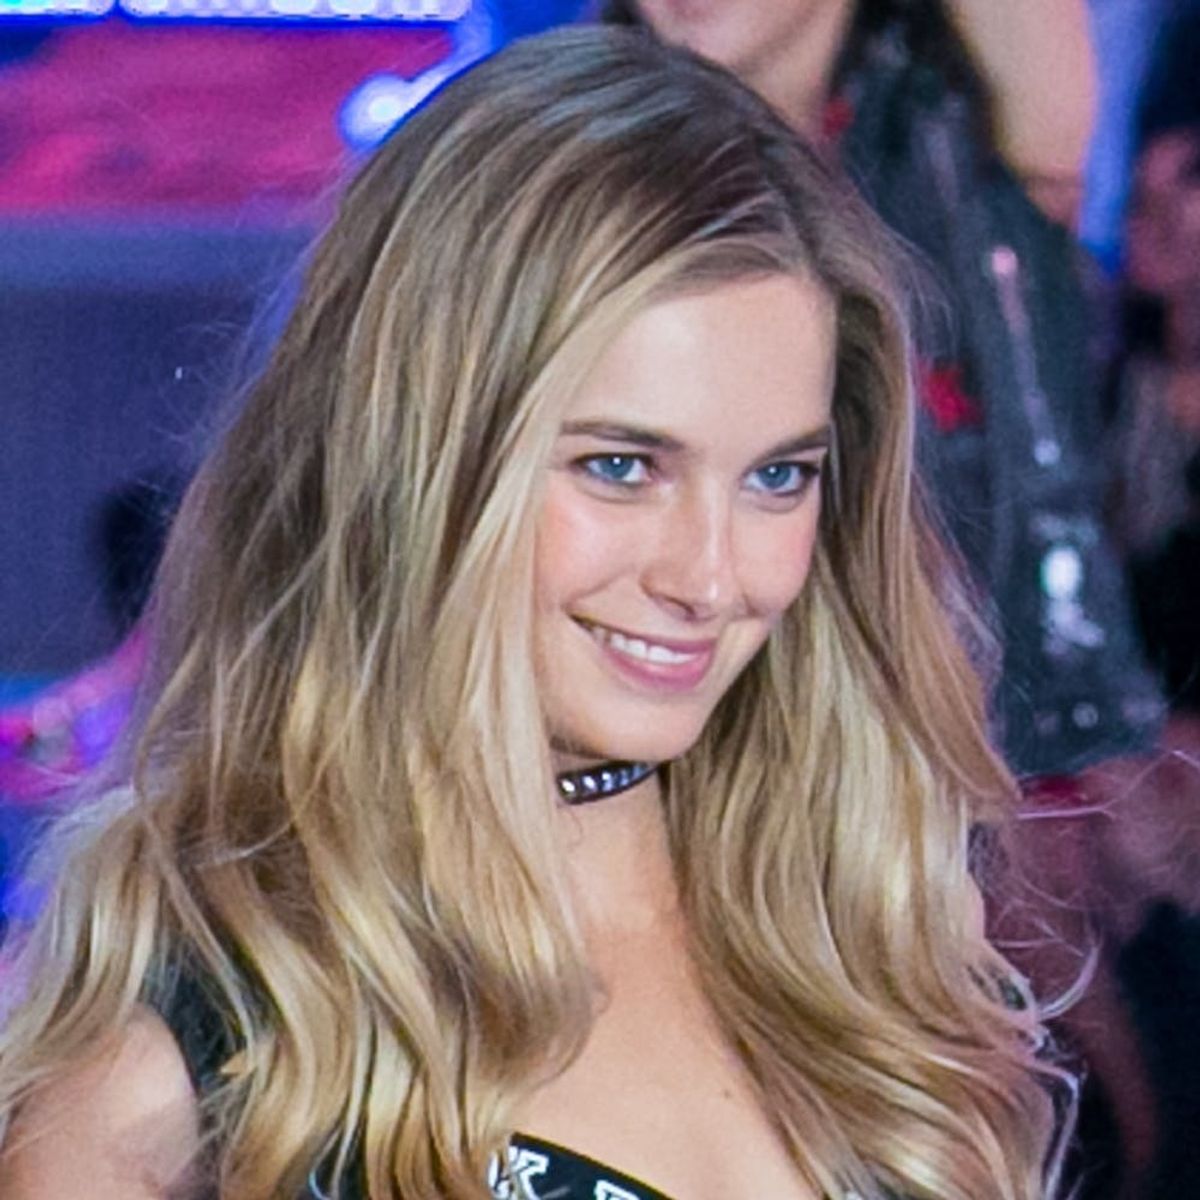 This Victoria’s Secret Model Was Asked to Cover Her Hips for a Photoshoot